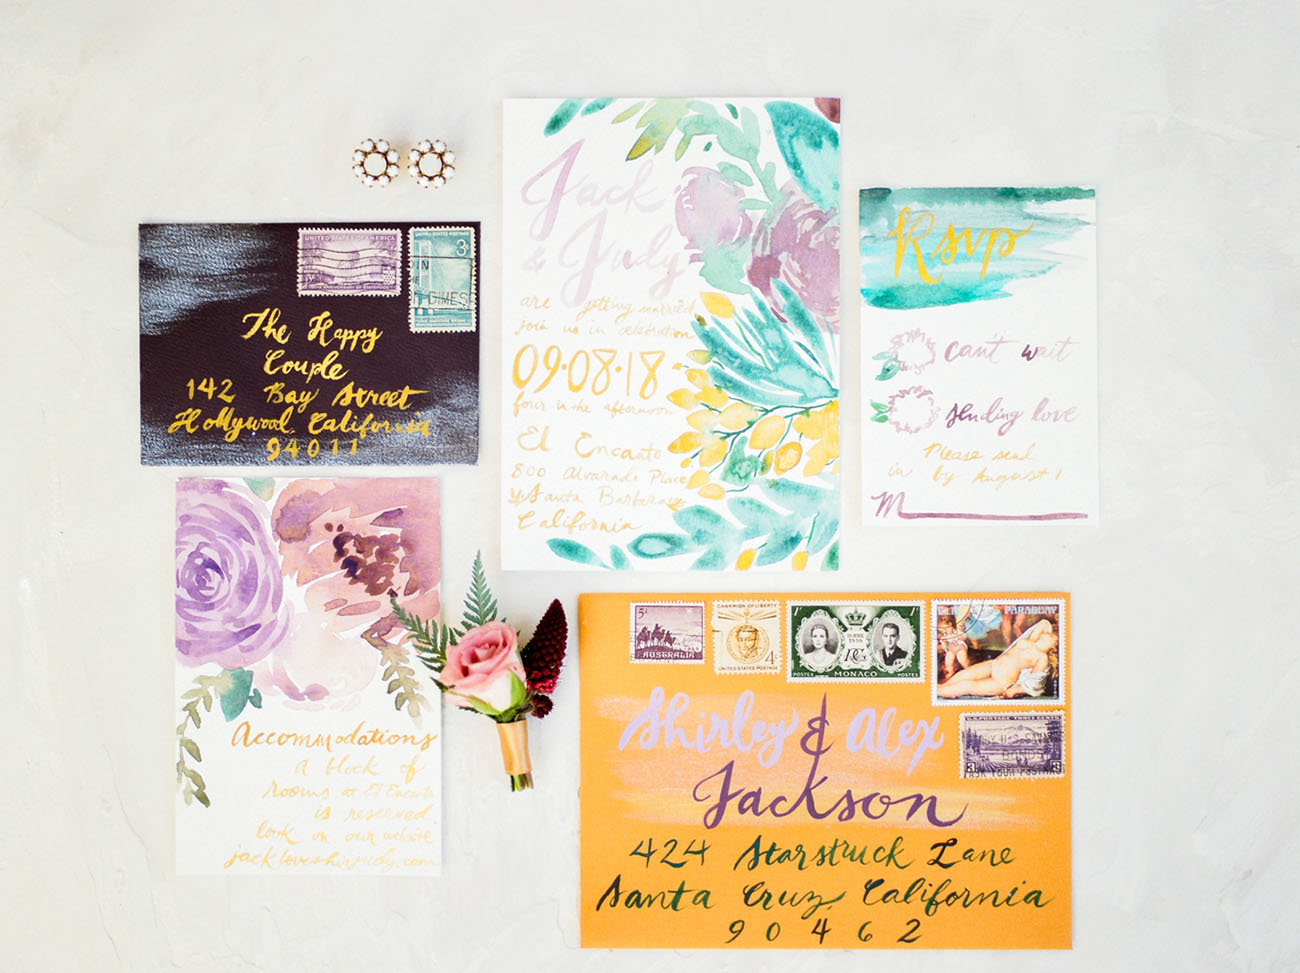 The colorful wedding invitation suite was done with watercolor florals